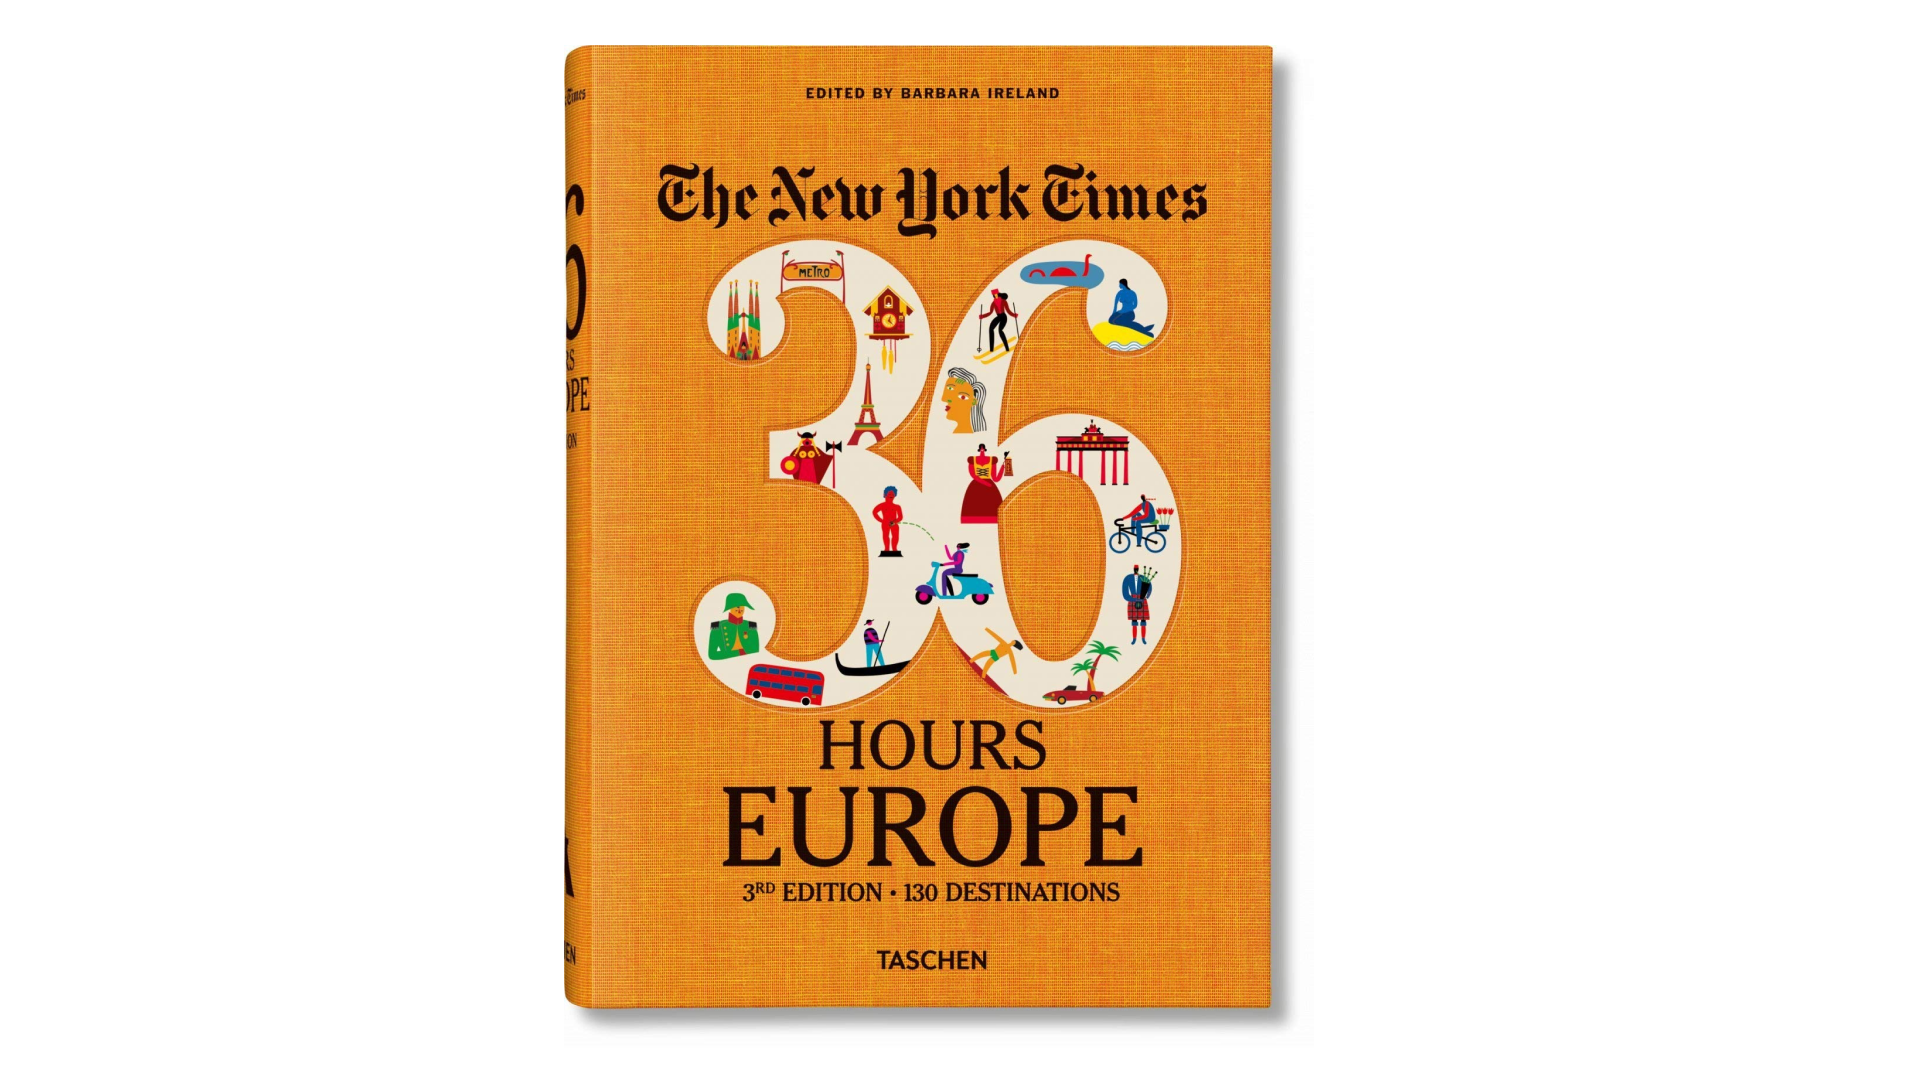 36 hours new york times travel guide book